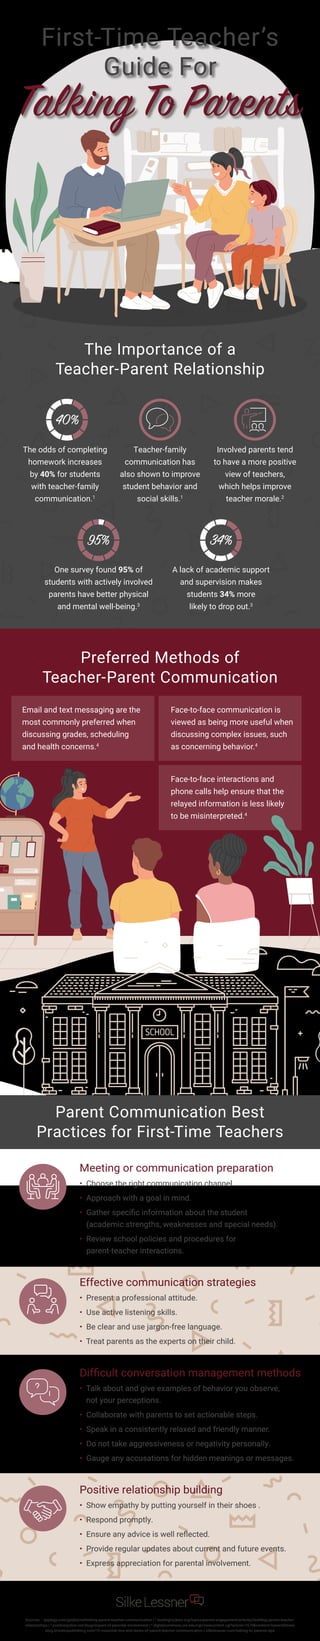 Sources: 1
apptegy.com/guides/rethinking-parent-teacher-communication | 2
readingrockets.org/topics/parent-engagement/articles/building-parent-teacher-
relationships | 3
positiveaction.net/blog/impact-of-parental-involvement | 4
digitalcommons.unl.edu/cgi/viewcontent.cgi?article=1579&context=honorstheses
blog.brookespublishing.com/15-essential-dos-and-donts-of-parent-teacher-communication | silkelessner.com/talking-to-parents-tips
First-Time Teacher’s
Guide For
Talking To Parents
The Importance of a
Teacher-Parent Relationship
The odds of completing
homework increases
by 40% for students
with teacher-family
communication.1
Teacher-family
communication has
also shown to improve
student behavior and
social skills.1
Involved parents tend
to have a more positive
view of teachers,
which helps improve
teacher morale.2
40%
One survey found 95% of
students with actively involved
parents have better physical
and mental well-being.3
A lack of academic support
and supervision makes
students 34% more
likely to drop out.3
95% 34%
Preferred Methods of
Teacher-Parent Communication
Email and text messaging are the
most commonly preferred when
discussing grades, scheduling
and health concerns.4
Face-to-face communication is
viewed as being more useful when
discussing complex issues, such
as concerning behavior.4
Face-to-face interactions and
phone calls help ensure that the
relayed information is less likely
to be misinterpreted.4
Meeting or communication preparation
• Choose the right communication channel.
• Approach with a goal in mind.
• 
Gather specific information about the student
(academic strengths, weaknesses and special needs).
• 
Review school policies and procedures for
parent-teacher interactions.
Effective communication strategies
• 
Present a professional attitude.
• 
Use active listening skills.
• 
Be clear and use jargon-free language.
• 
Treat parents as the experts on their child.
Difficult conversation management methods
• 
Talk about and give examples of behavior you observe,
not your perceptions.
• 
Collaborate with parents to set actionable steps.
• 
Speak in a consistently relaxed and friendly manner.
• 
Do not take aggressiveness or negativity personally.
• 
Gauge any accusations for hidden meanings or messages.
Positive relationship building
• 
Show empathy by putting yourself in their shoes .
• 
Respond promptly.
• 
Ensure any advice is well reflected.
• 
Provide regular updates about current and future events.
• 
Express appreciation for parental involvement.
Parent Communication Best
Practices for First-Time Teachers
 